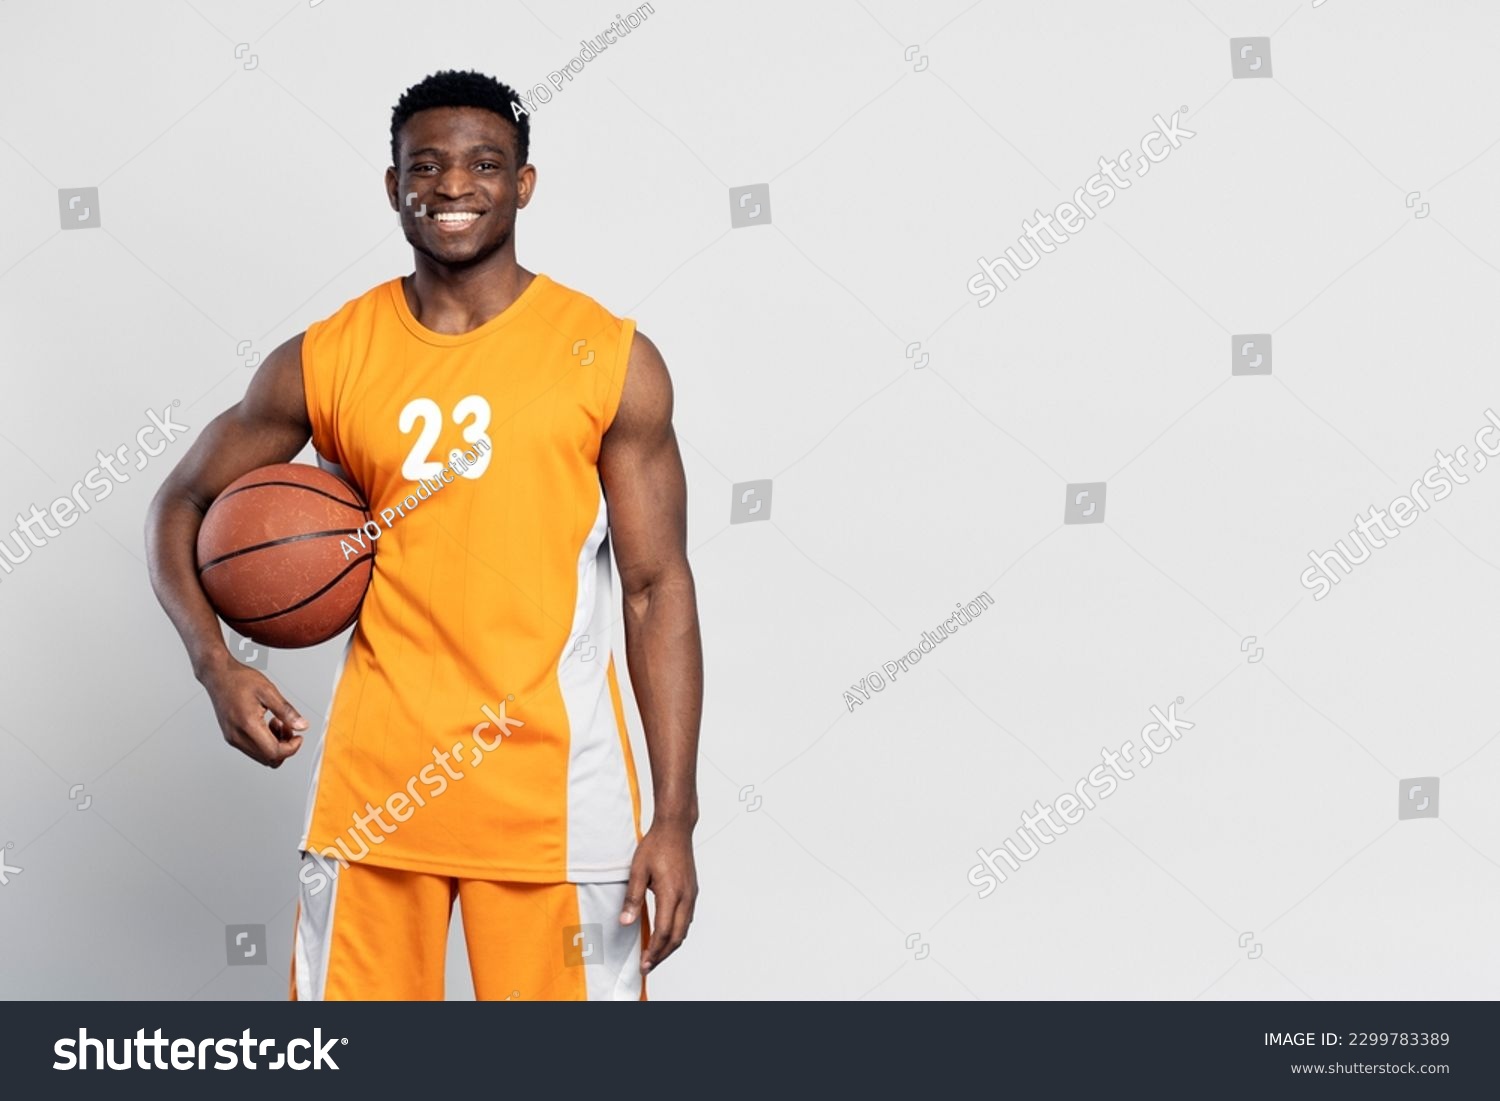 Portrait of confident smiling African American man, professional basketball player holding ball isolated on white background. Sportsman wearing orange basketball uniform looking at camera, copy space #2299783389